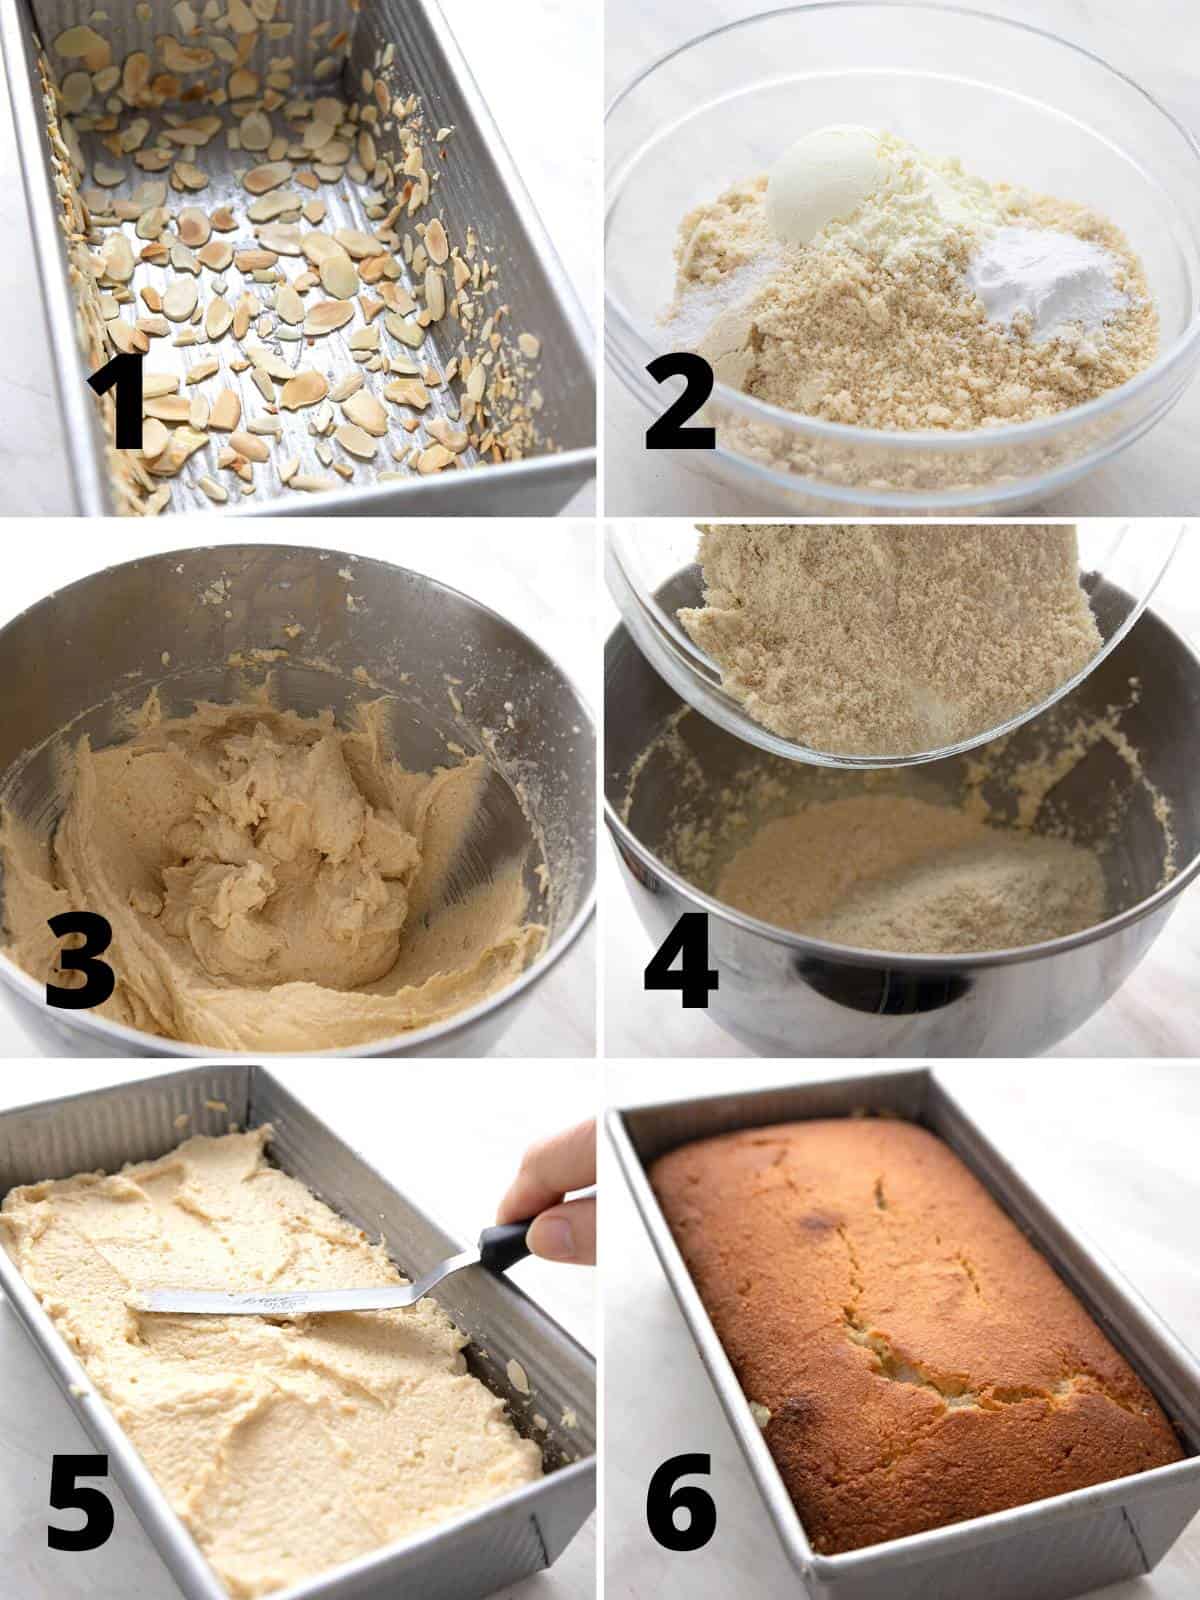 A collage of 6 images showing how to bake an almond flour cake.